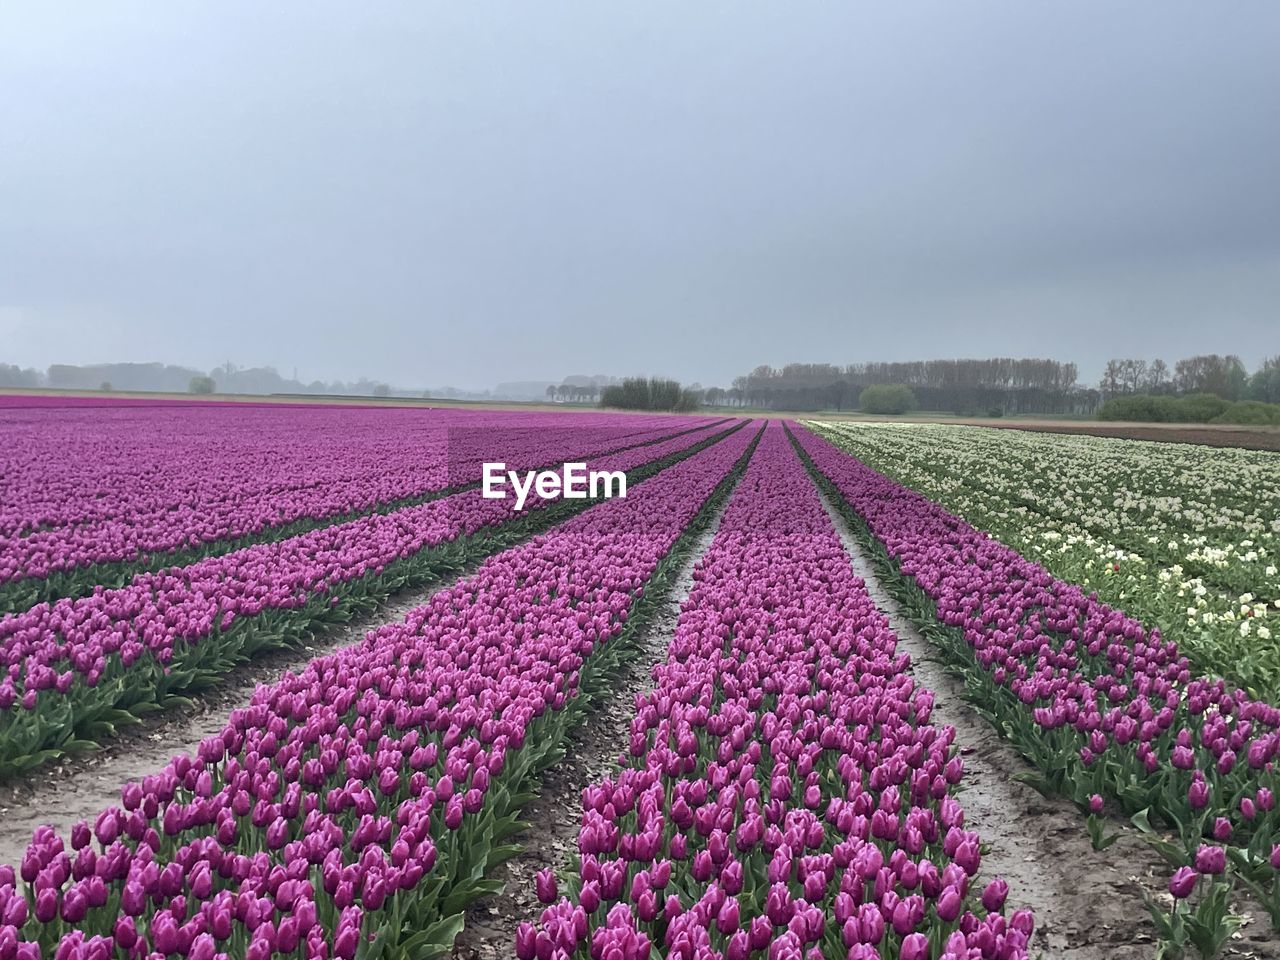 plant, flower, flowering plant, beauty in nature, landscape, nature, agriculture, growth, freshness, field, environment, land, rural scene, sky, purple, in a row, scenics - nature, no people, tranquility, springtime, abundance, farm, tranquil scene, pink, outdoors, fragility, crop, cloud, day, tulip, idyllic, flowerbed, botany, vegetable, lavender, food and drink, multi colored